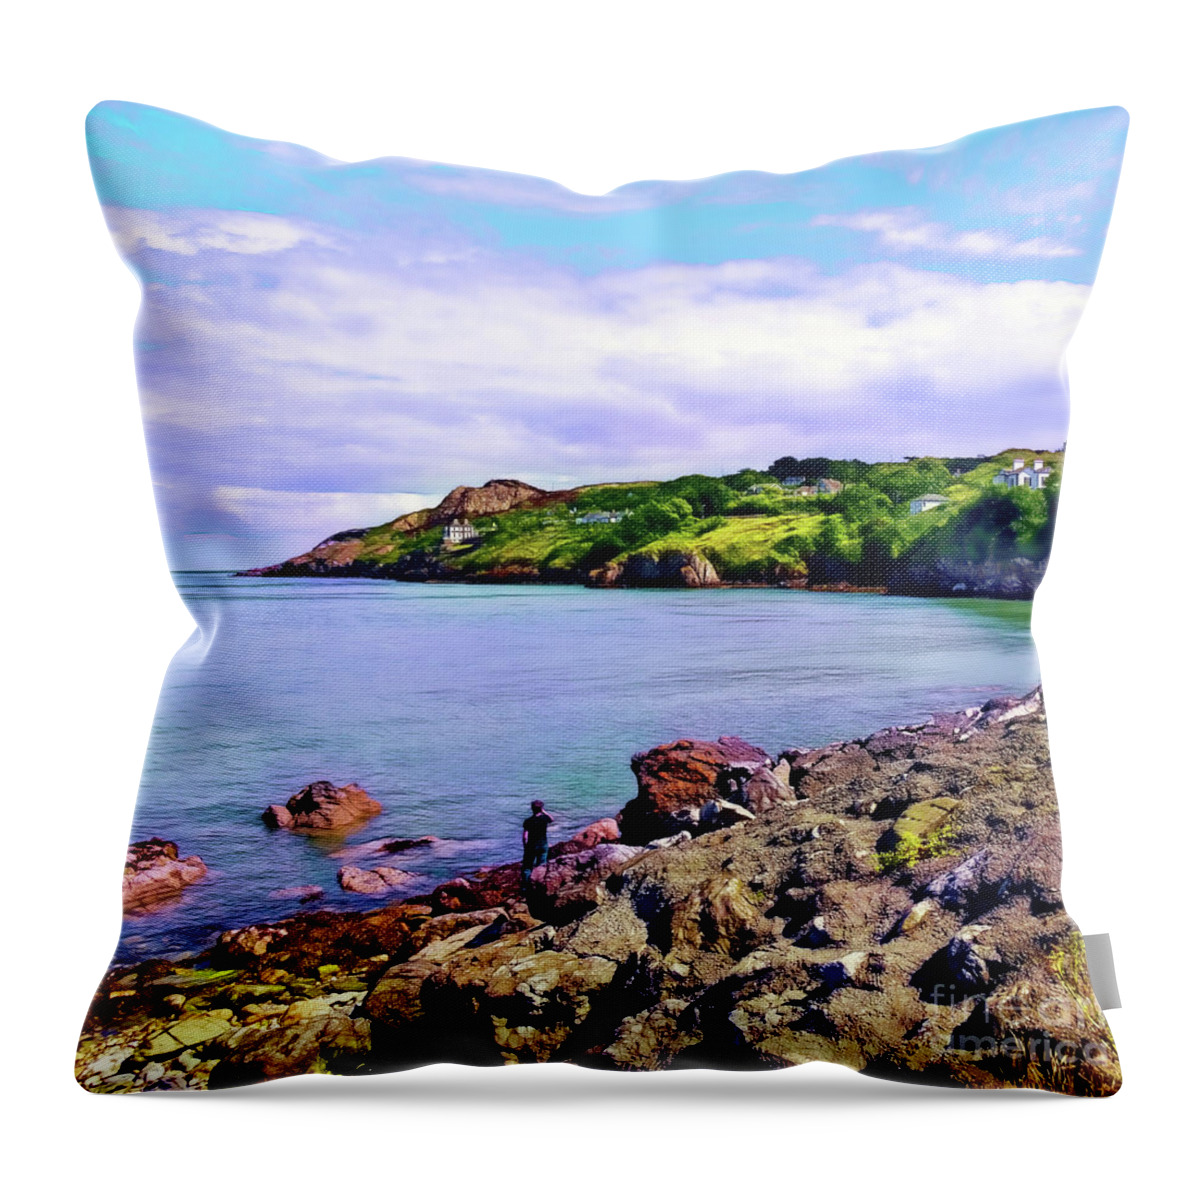  Throw Pillow featuring the photograph Looking Across by Judi Bagwell